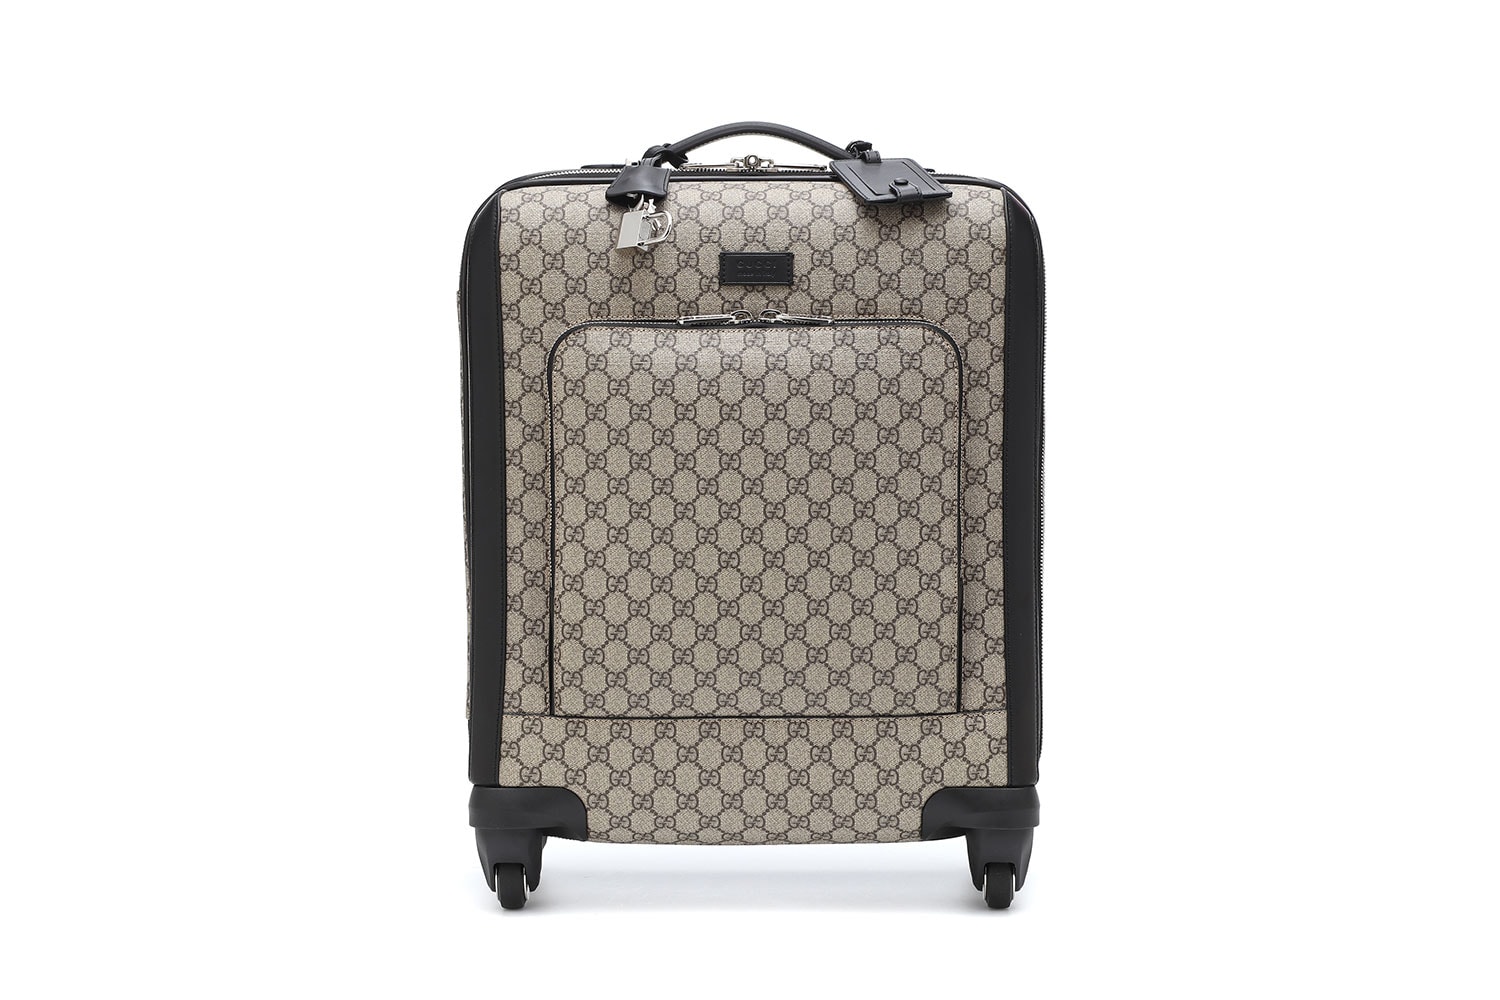 gucci alessandro michele gg monogram carry-on suitcase in-flight travel summer vacation holiday mytheresa